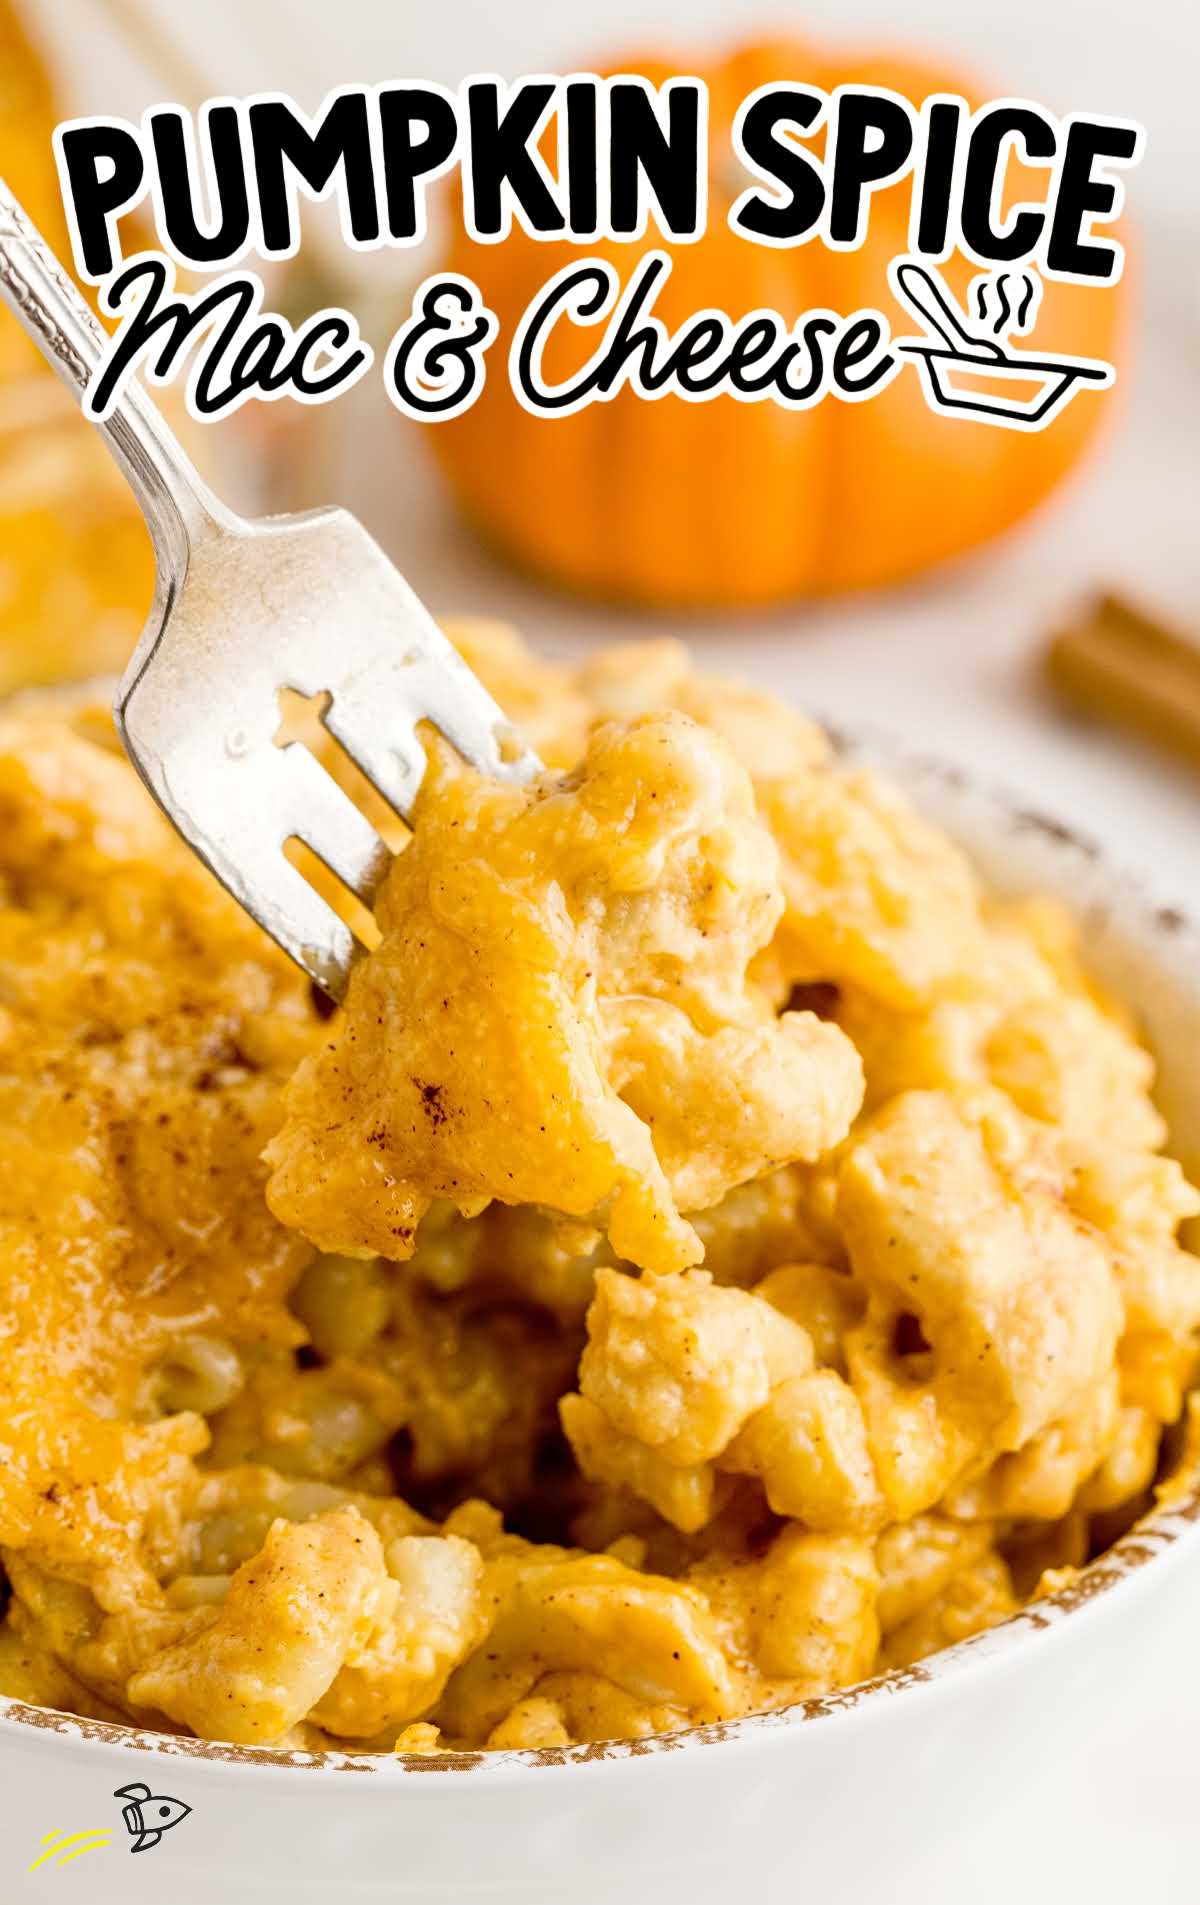 a close up shot of a bowl full of pumpkin spice mac and cheese with a fork grabbing a piece